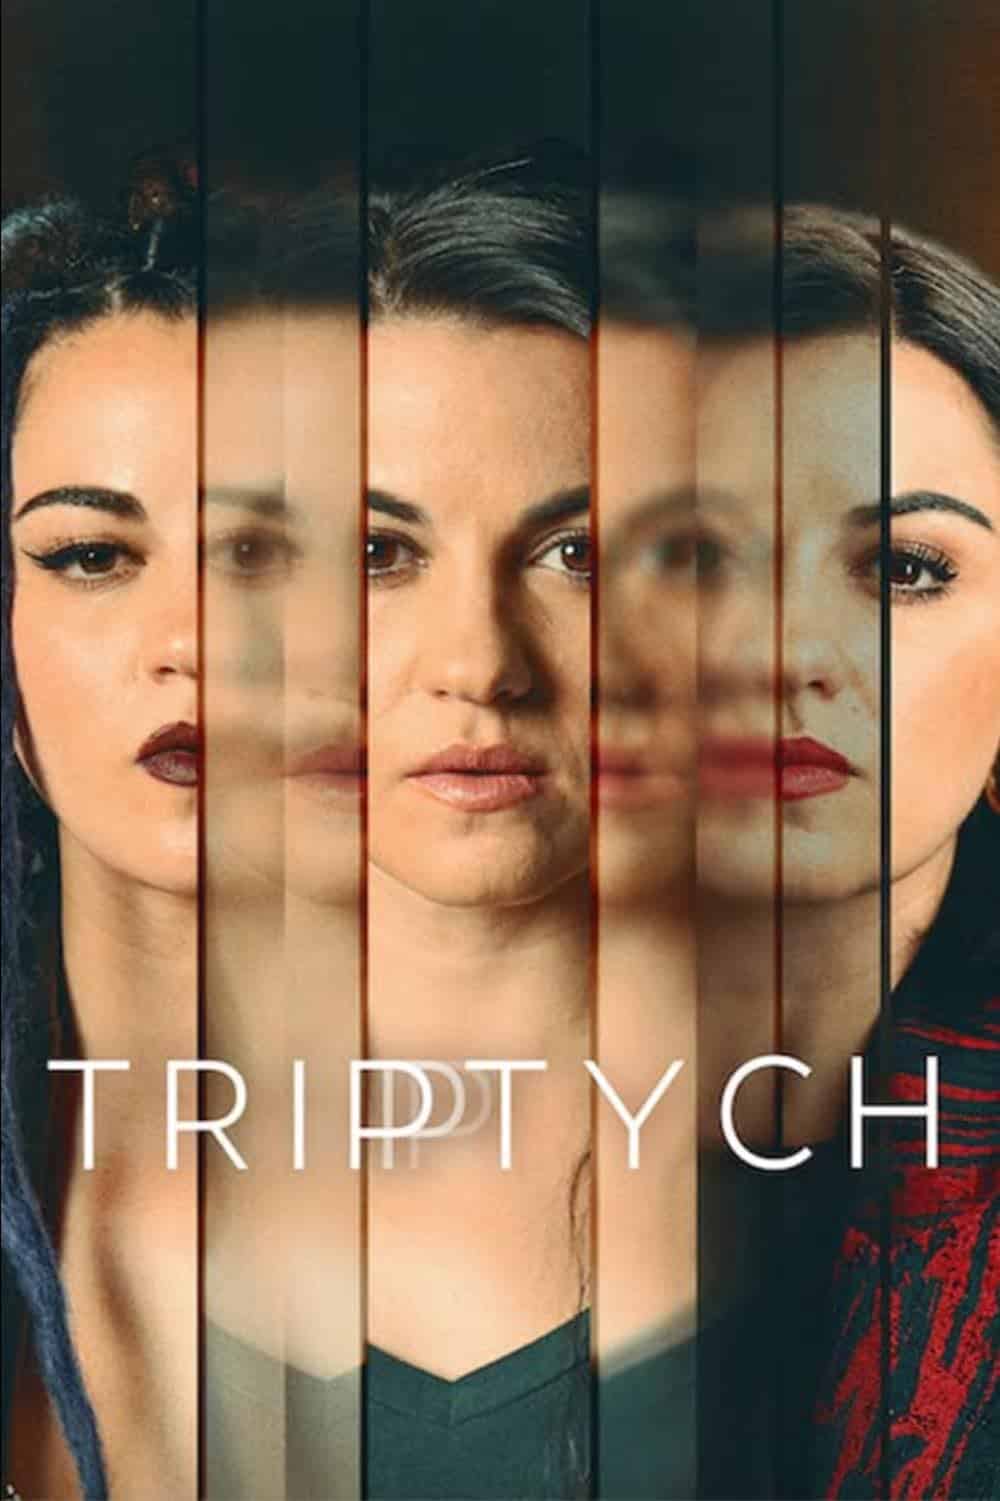 The poster for Triptych with Maite Perroni as different characters